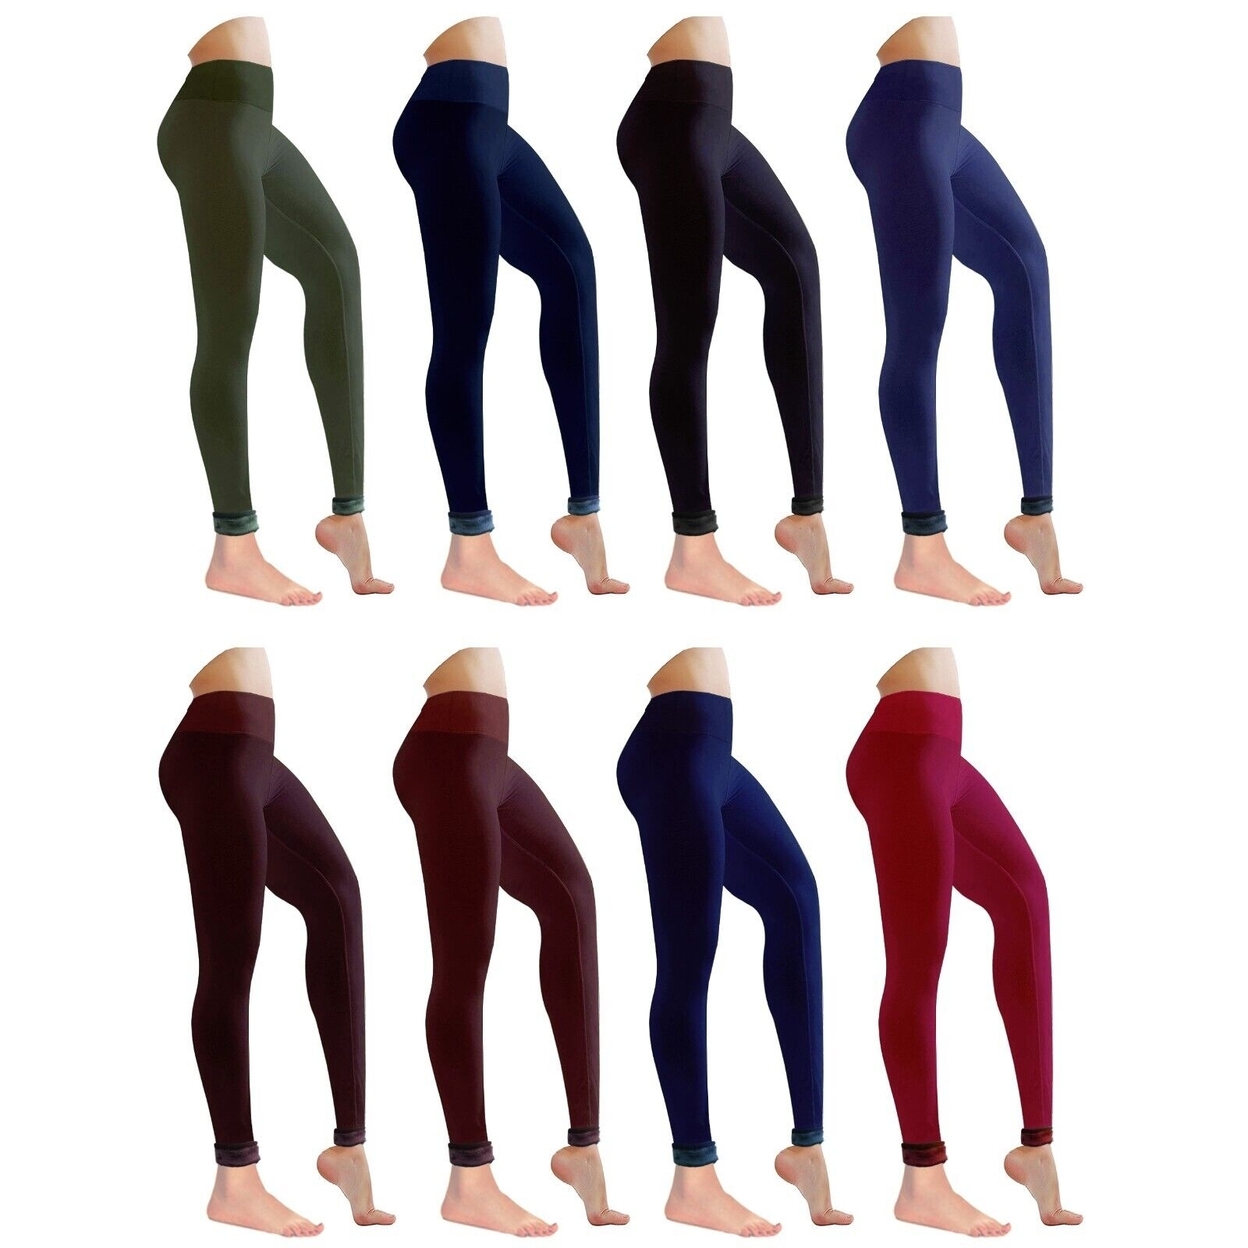 3-Pack: Women's Winter Warm Ultra Soft Cozy Fur Lined Leggings - Assorted, Small